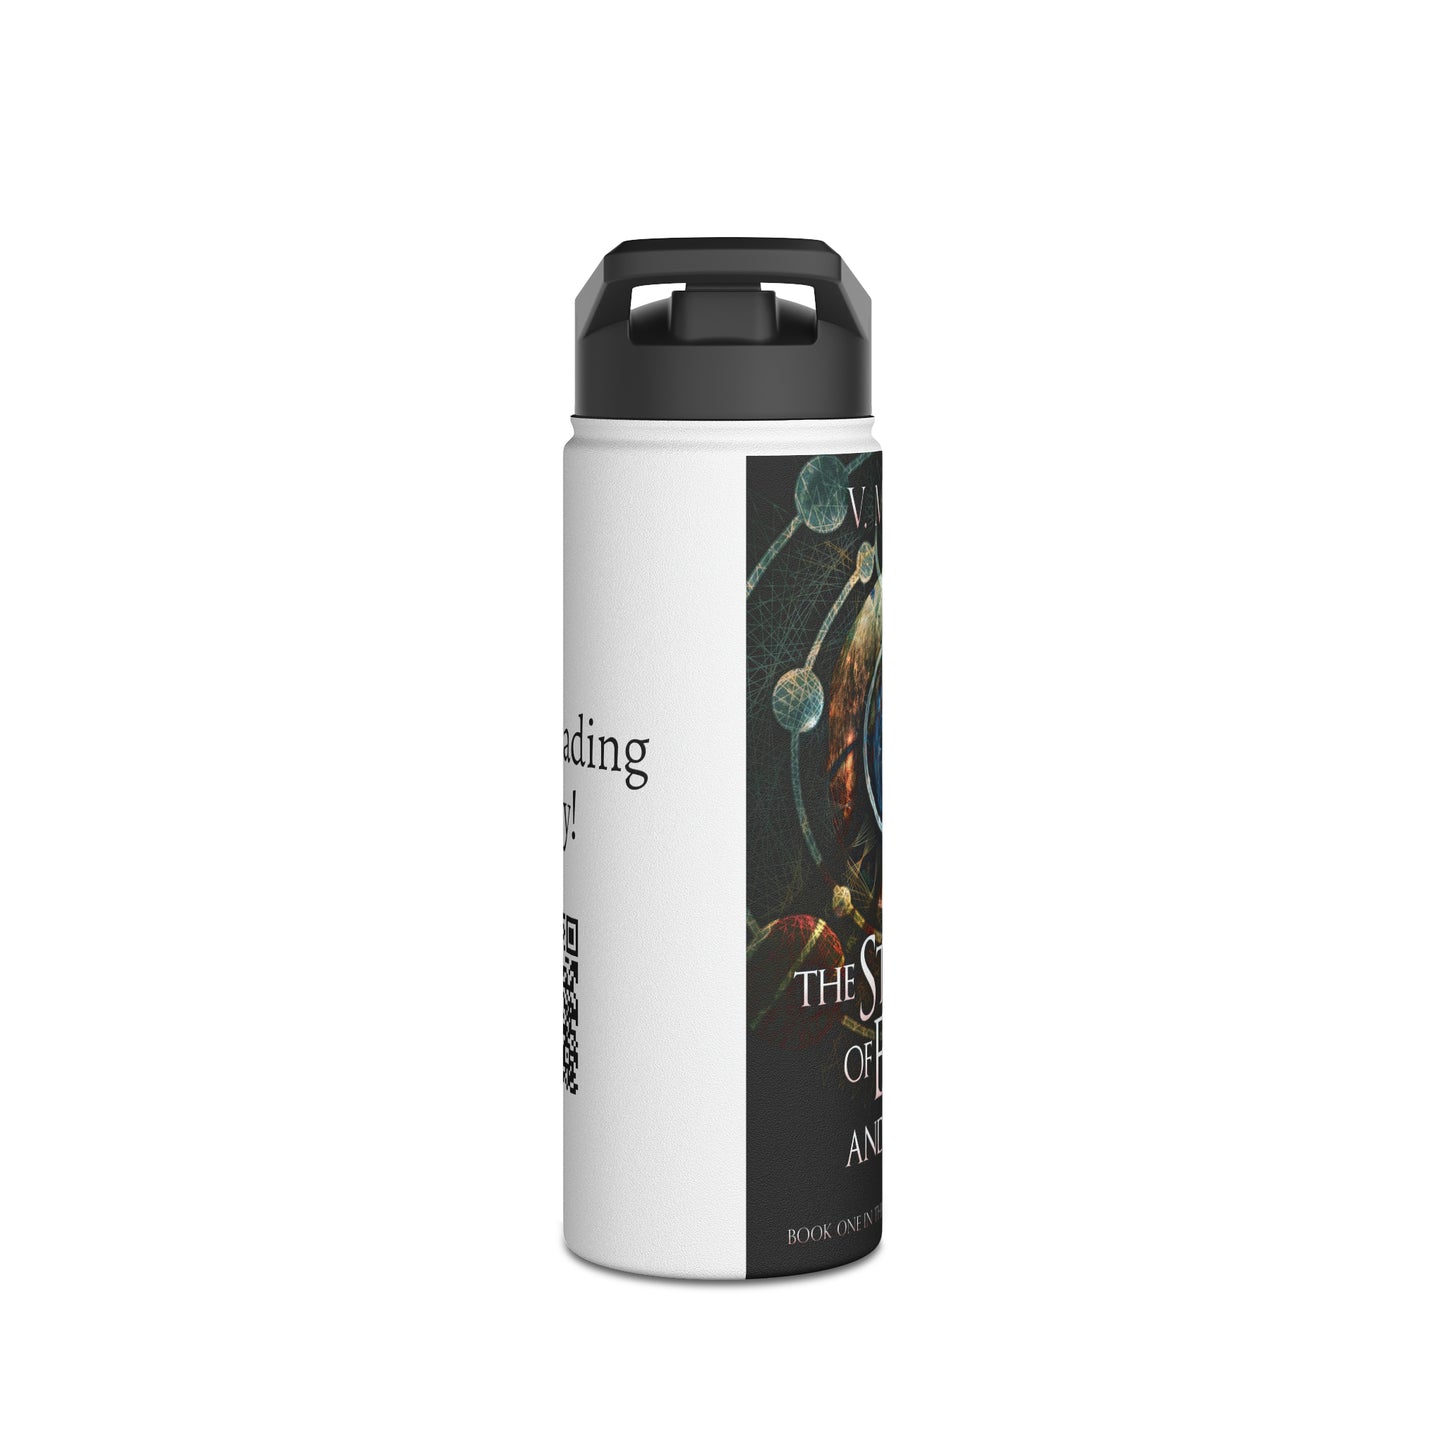 The Stones of Earth and Air - Stainless Steel Water Bottle